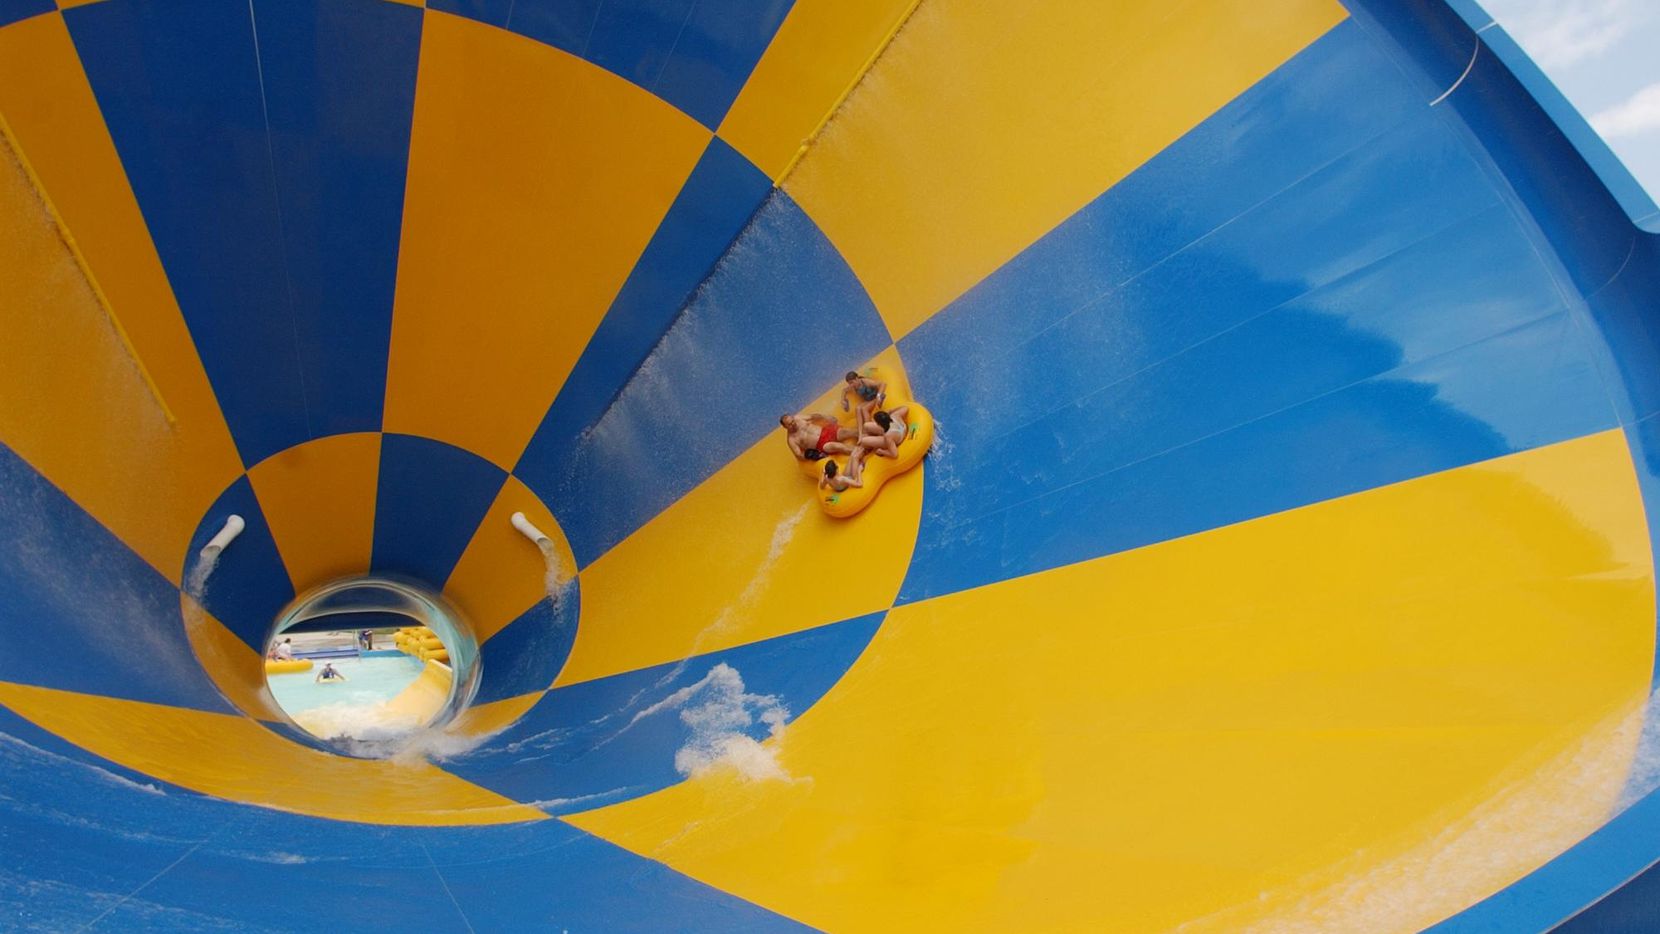 Taking a wild ride down the Tornado at Six Flags Hurricane Harbor in Arlington, the largest...